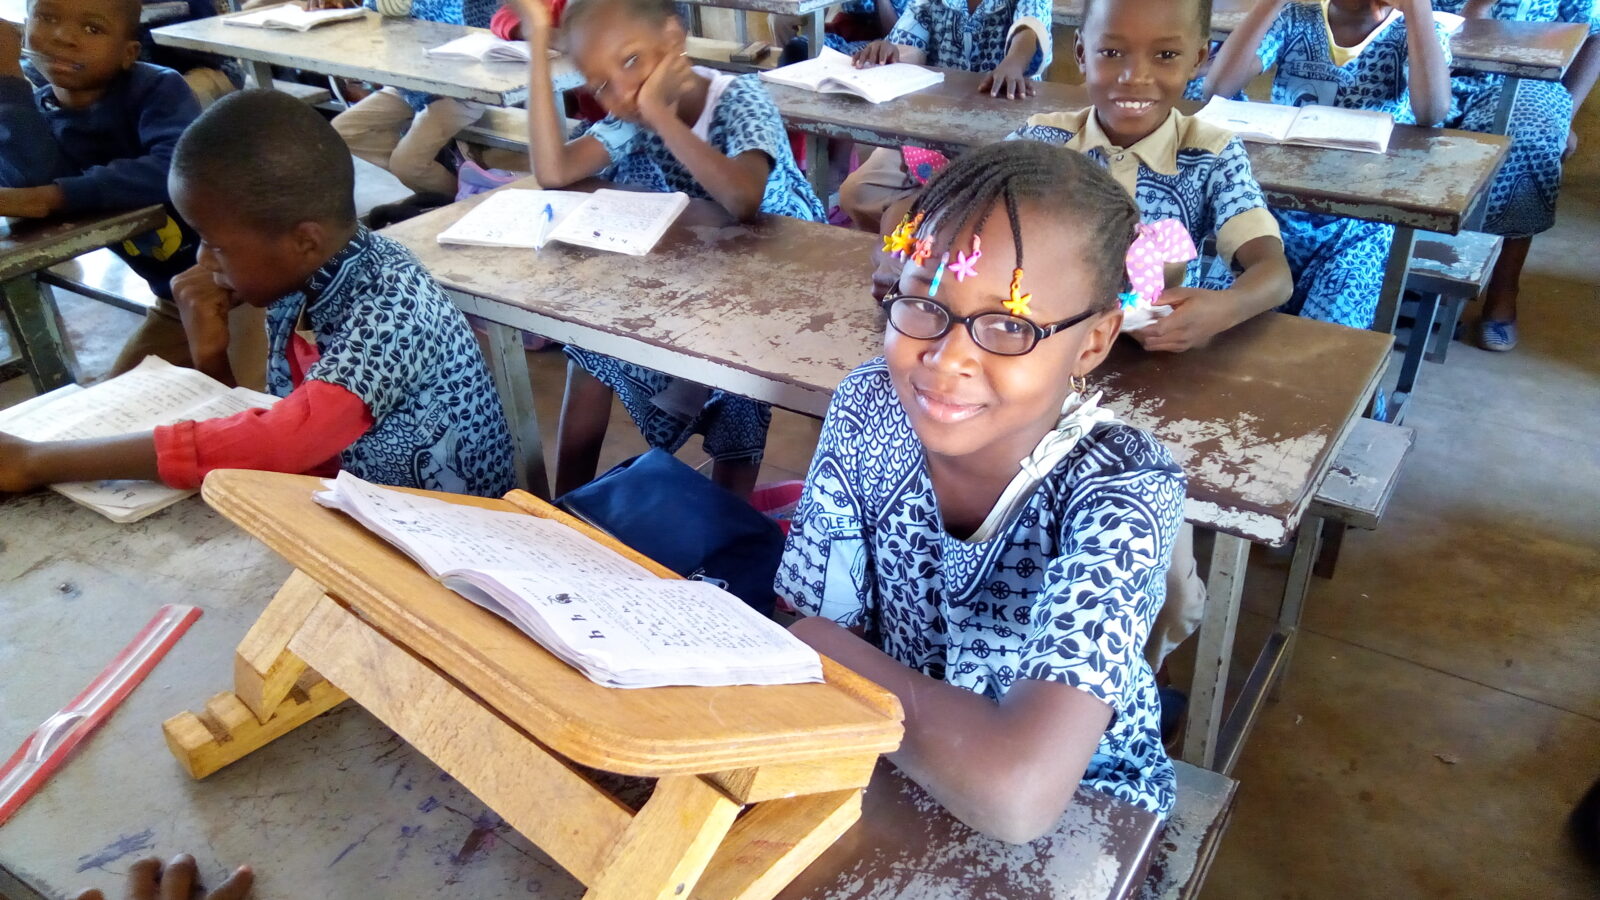 A young girl is sitting at a desk in a classroom with other pupils.